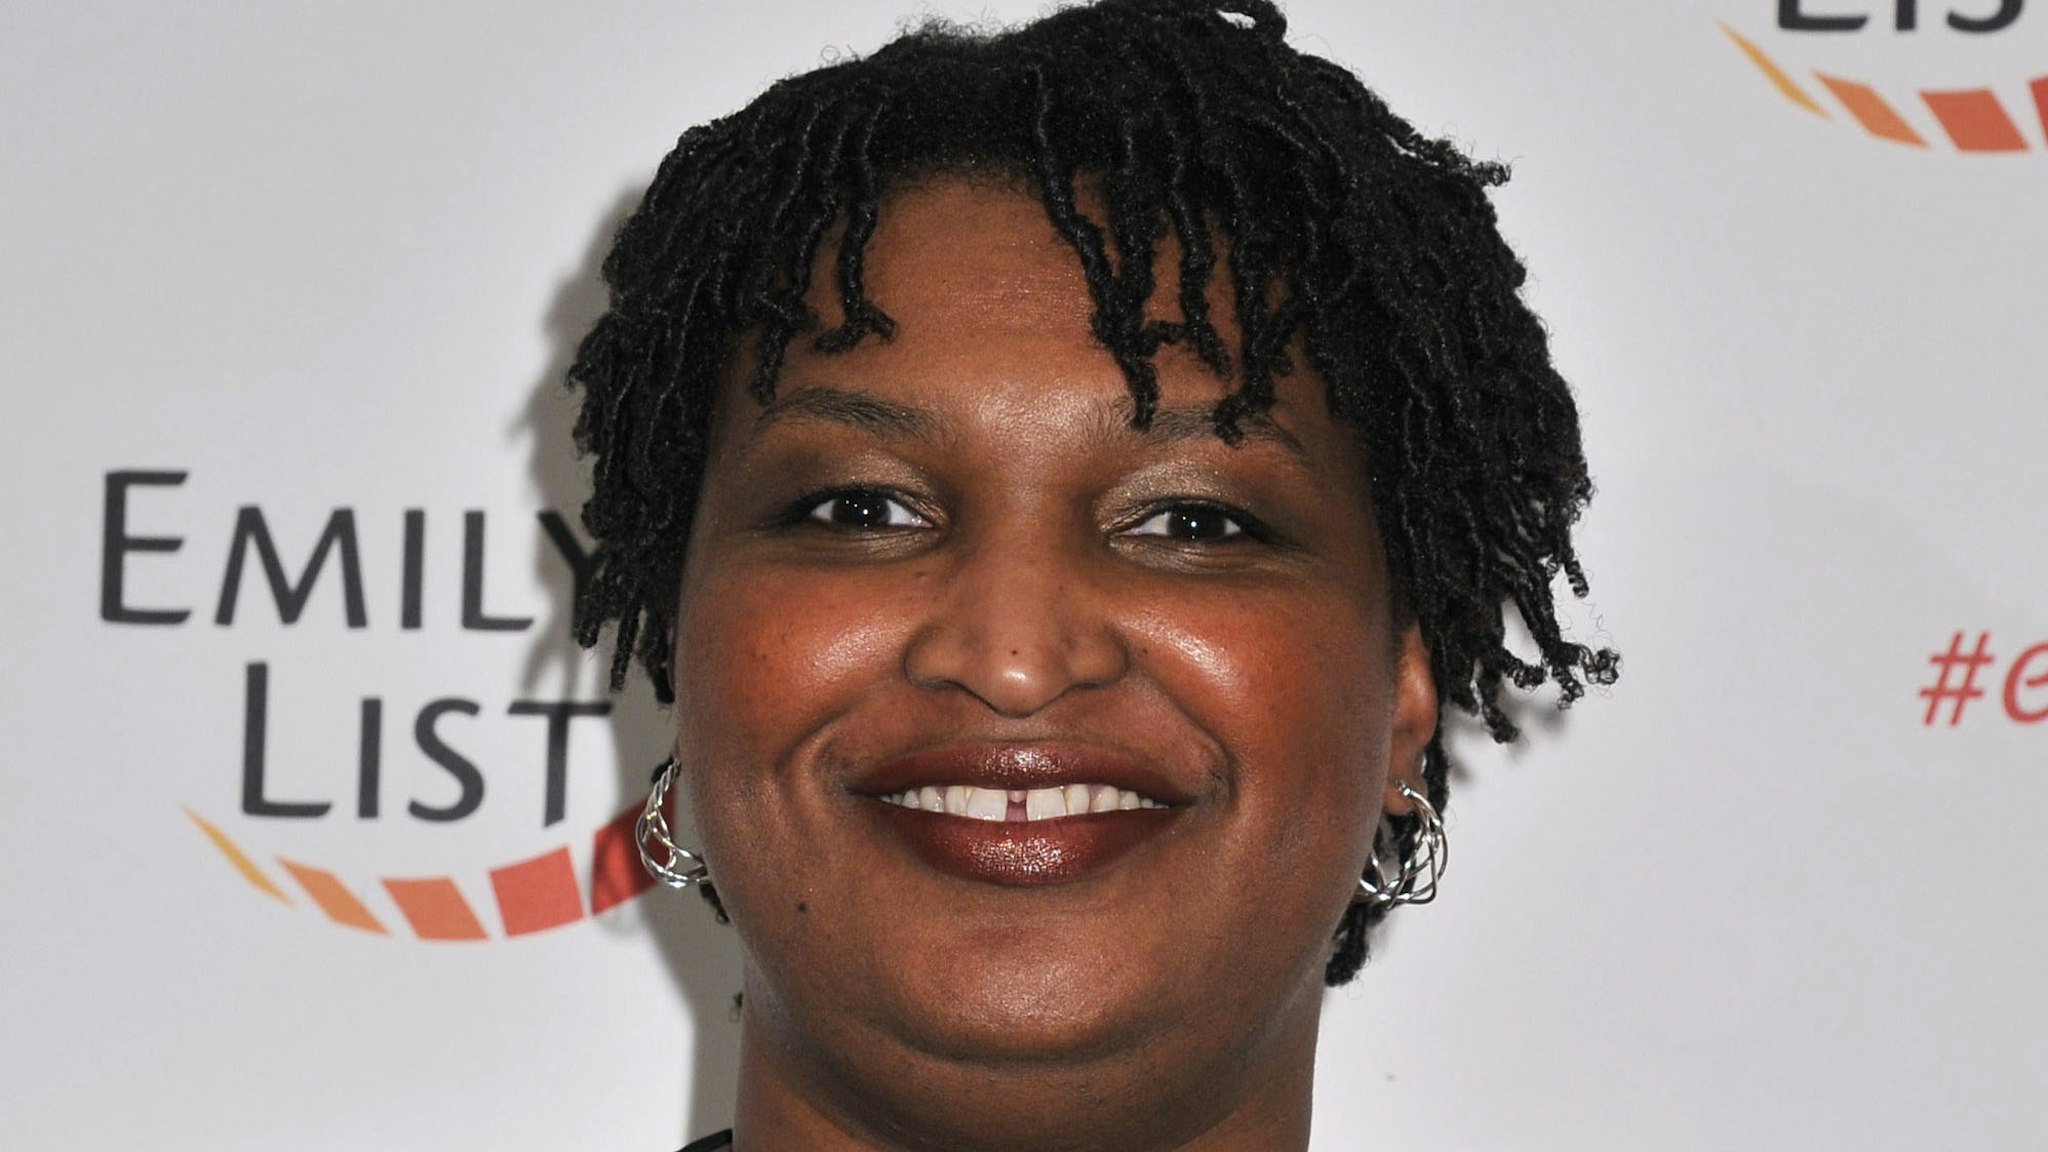 WASHINGTON, DC - MARCH 03: Georgia House Minority Leader Stacey Abrams attends EMILY's List 30th Anniversary Gala at Washington Hilton on March 3, 2015 in Washington, DC.